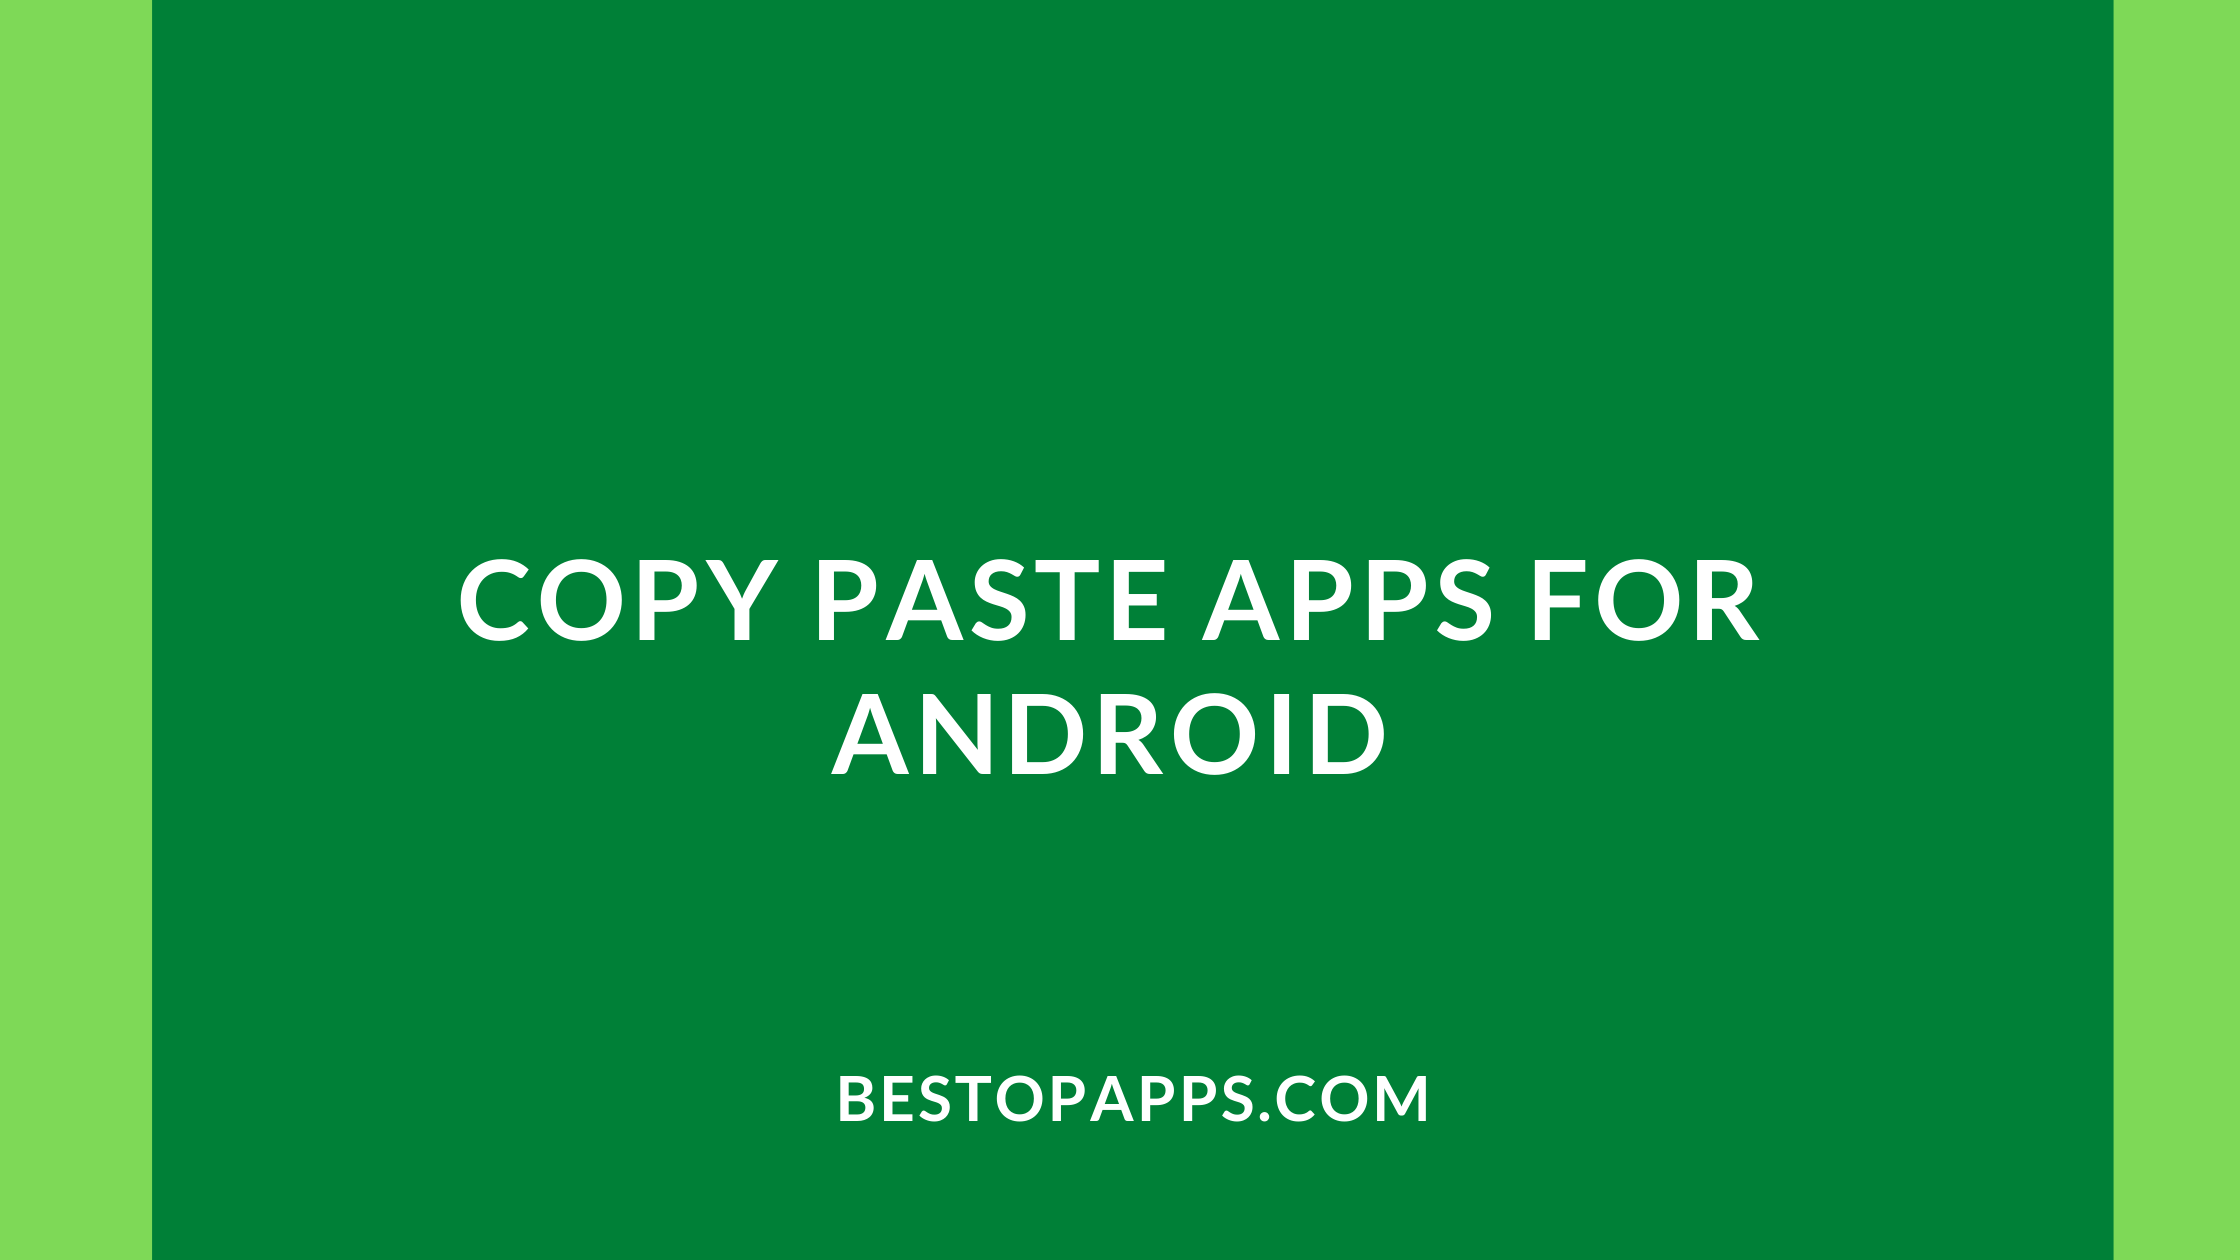 Copy Paste Apps for Android